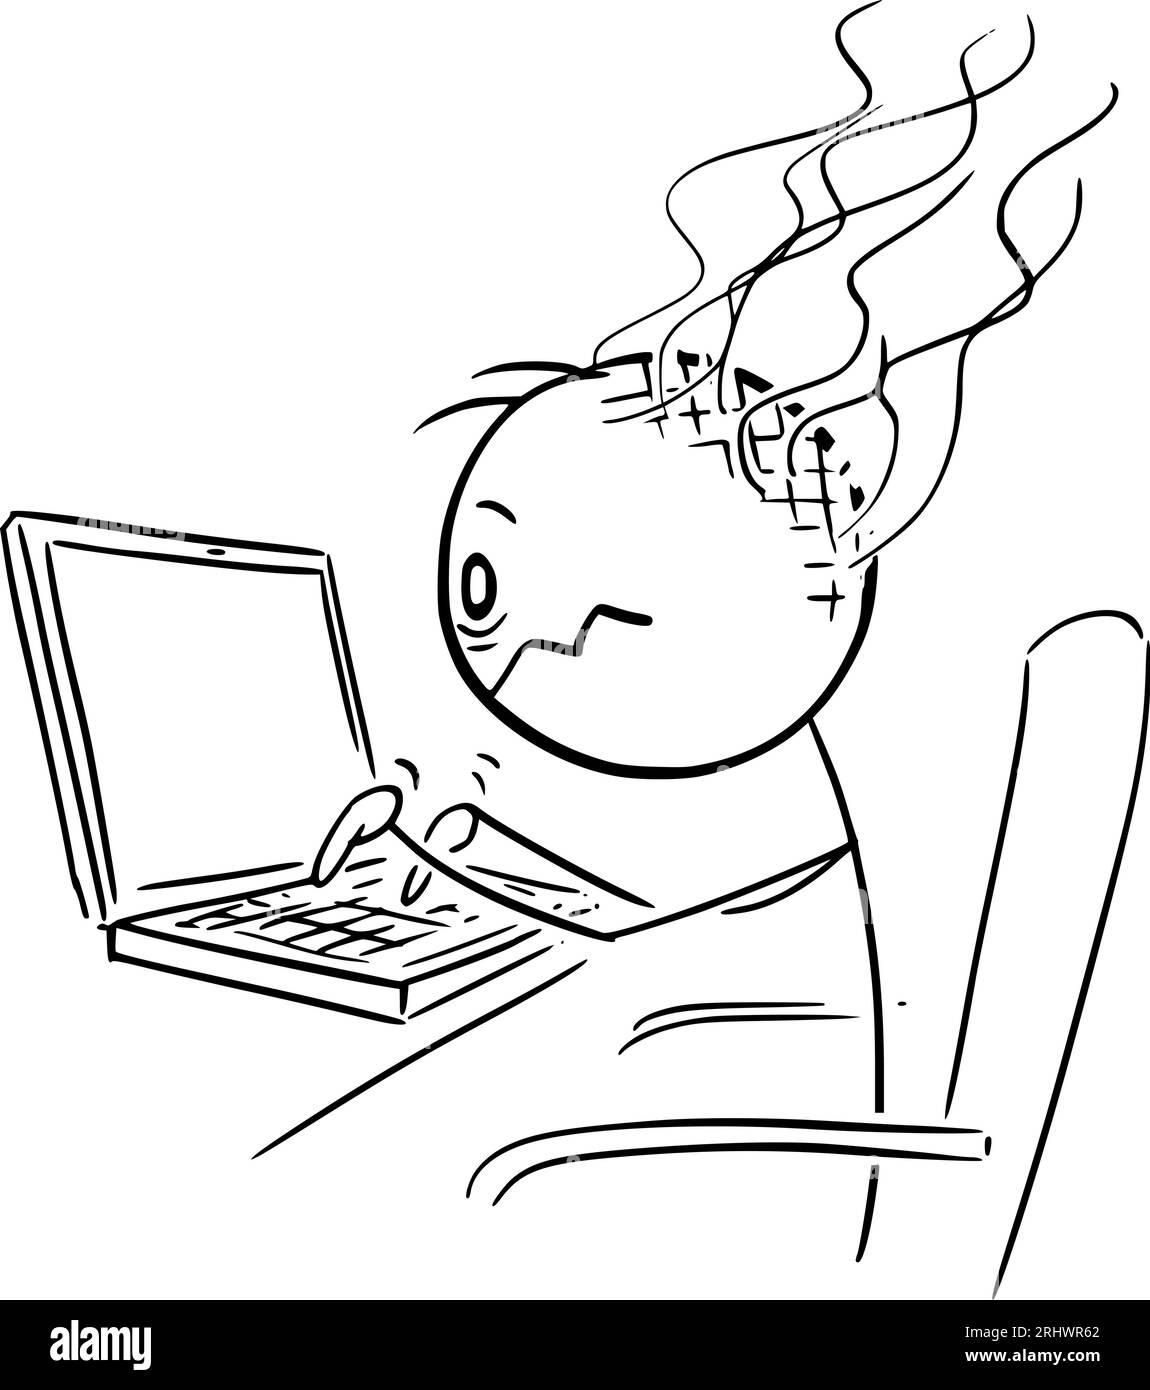 Tired Person Working on Computer, Vector Cartoon Stick Figure Illustration Stock Vector